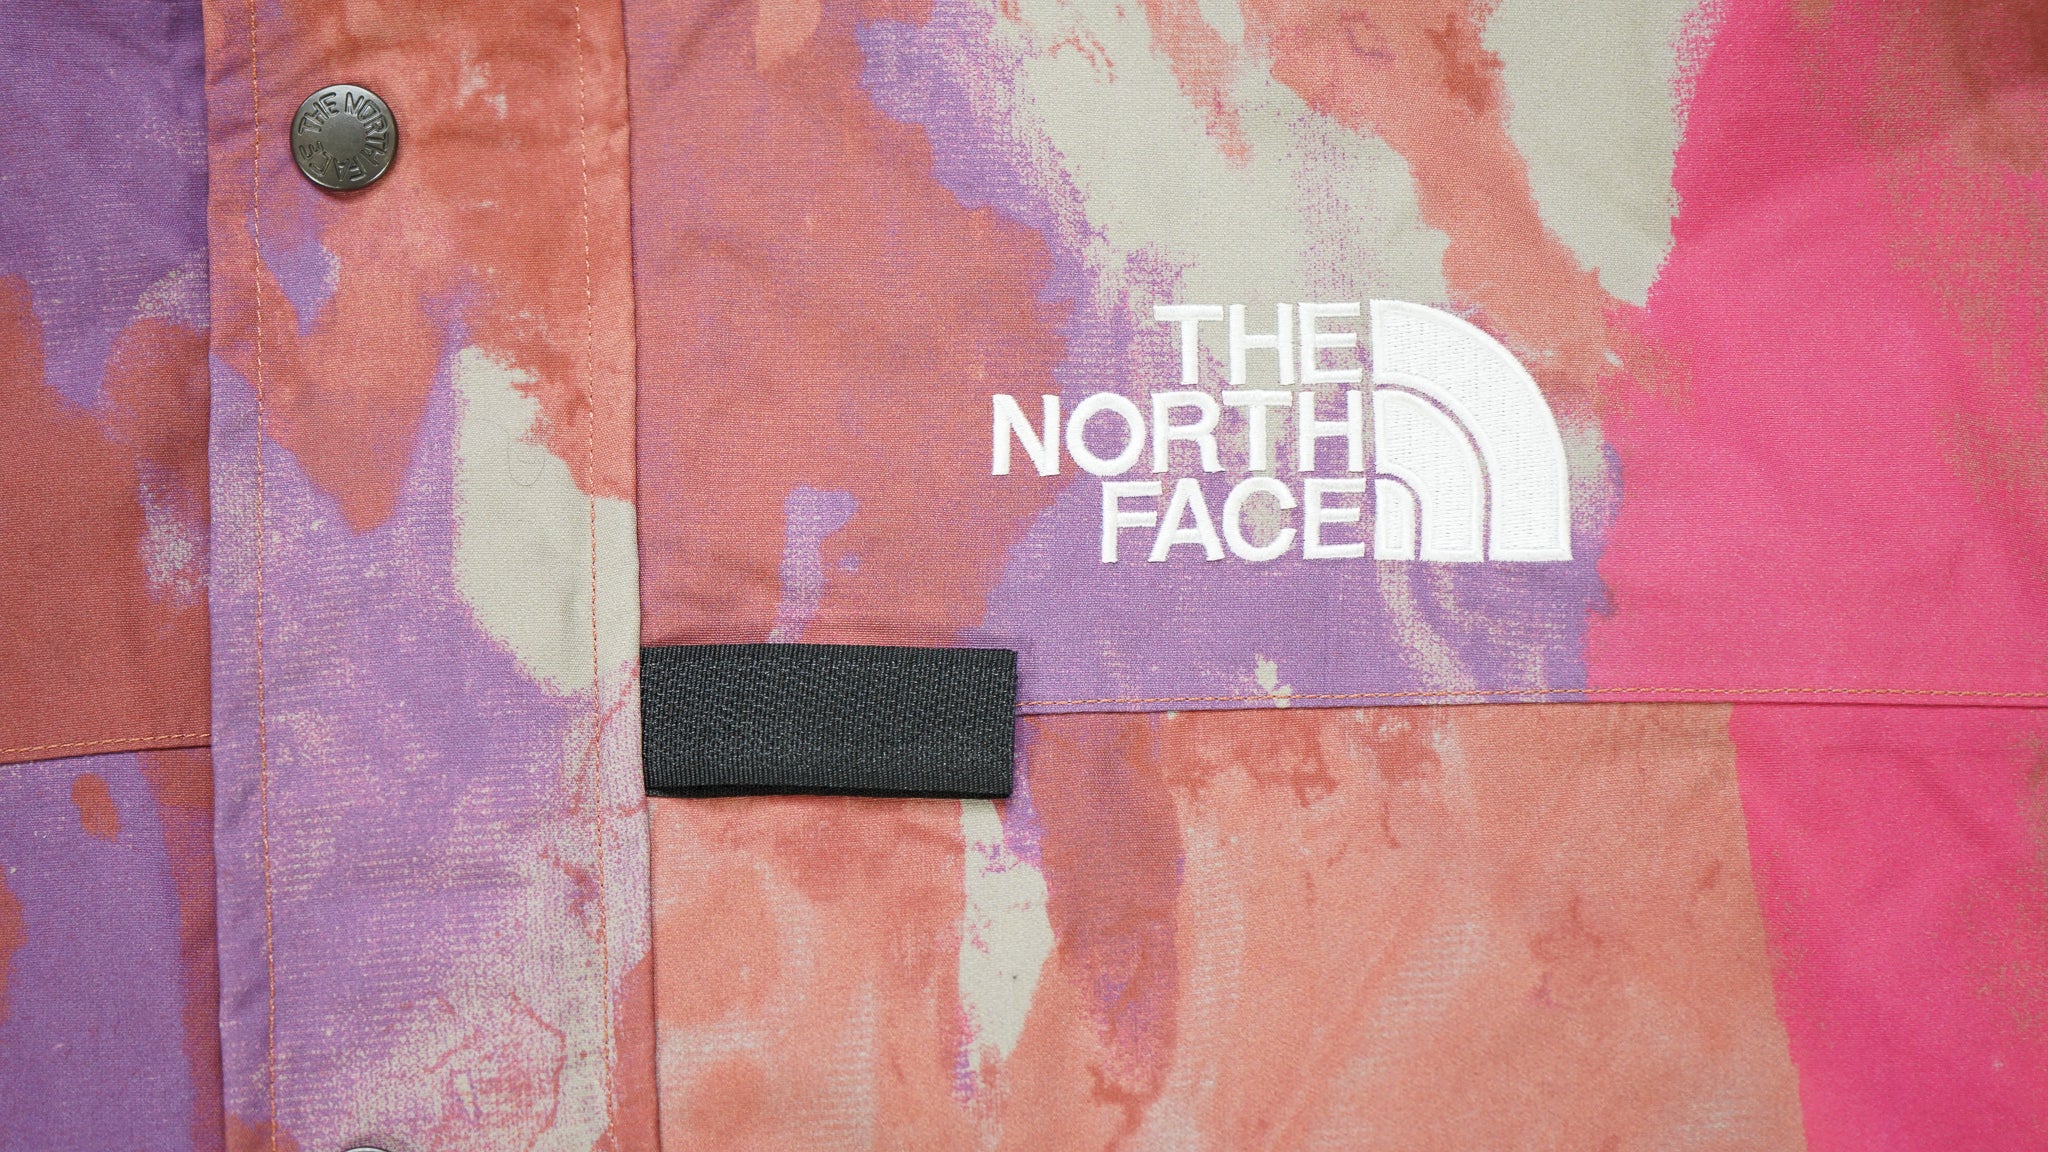 SS20 Supreme x The North Face 